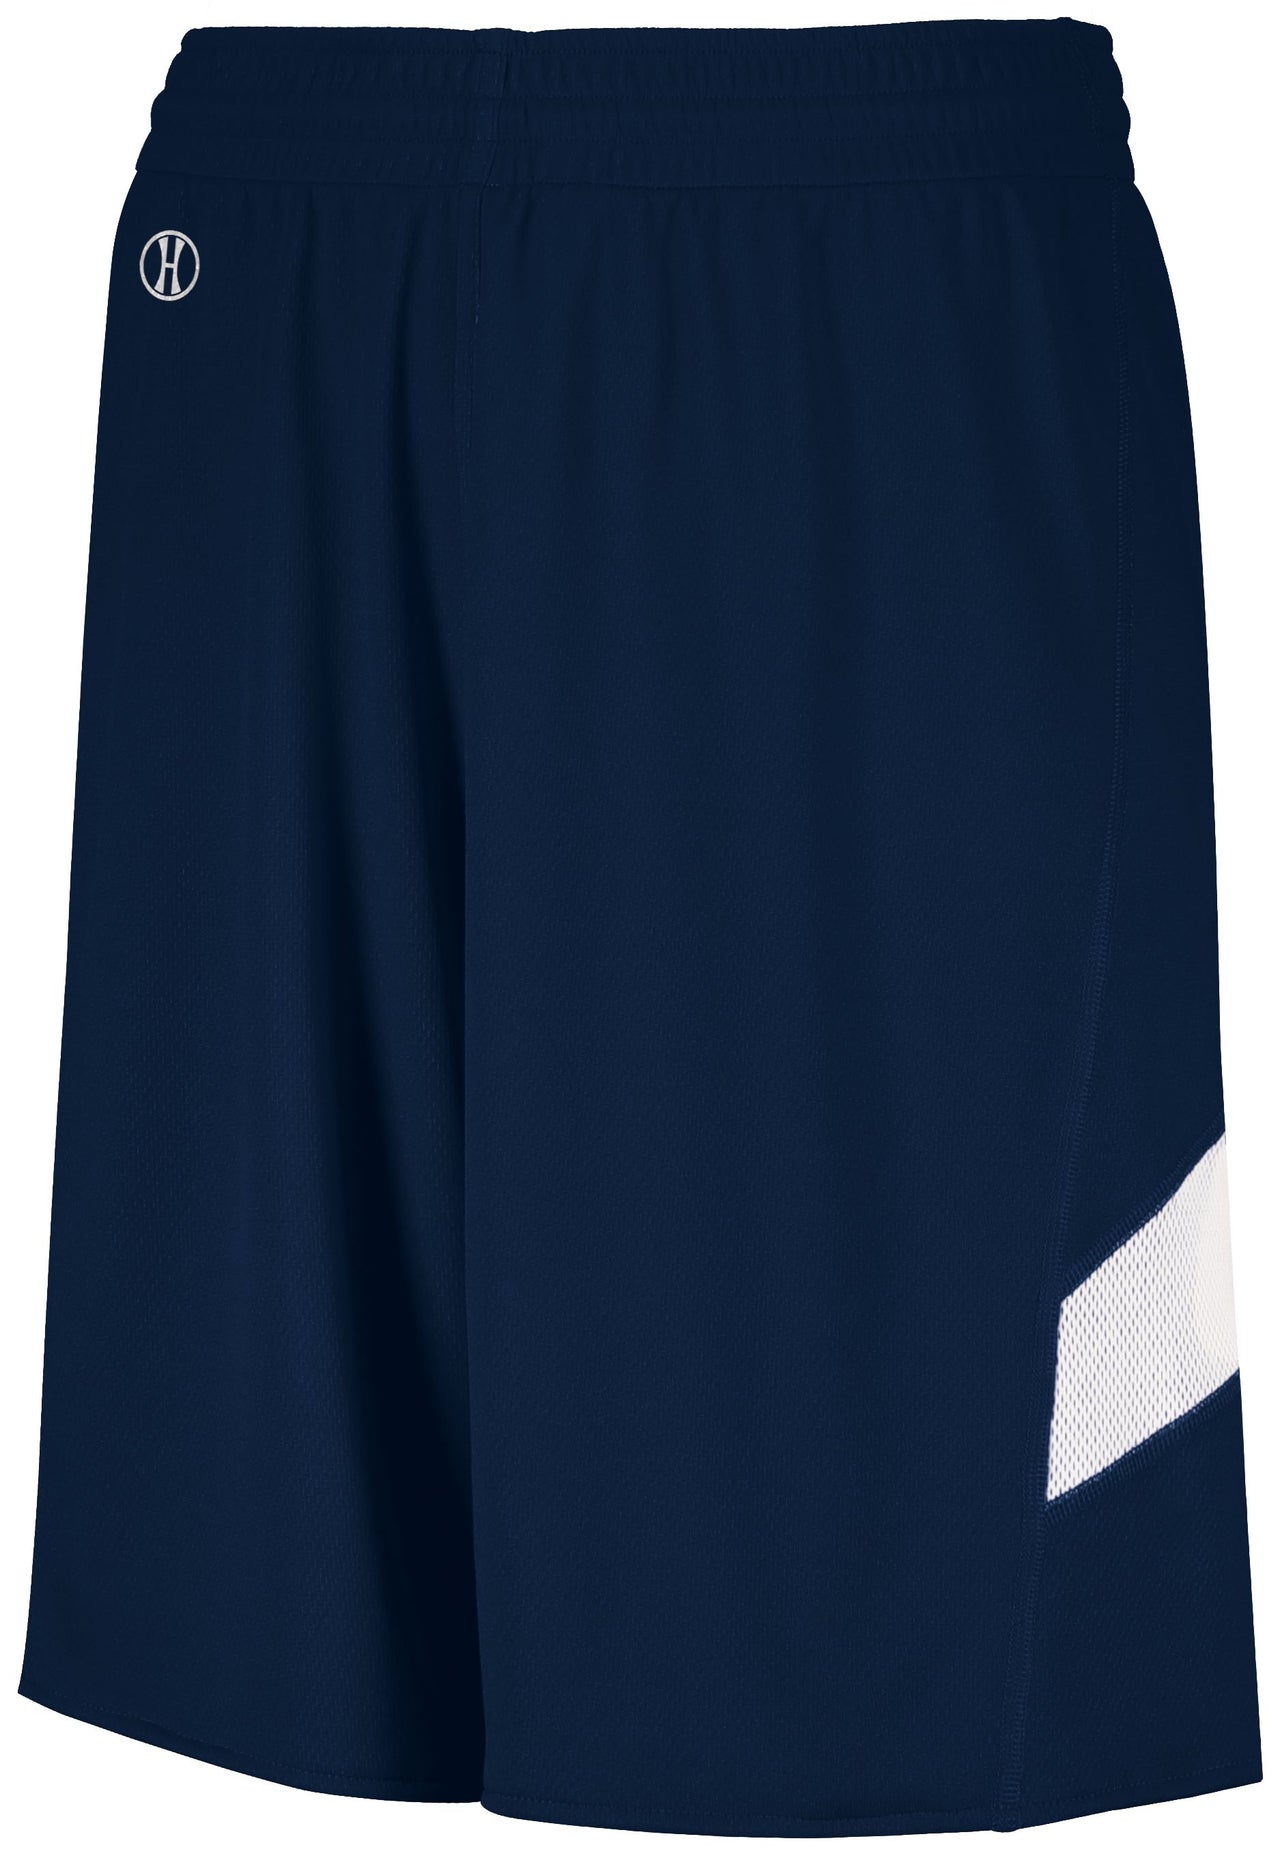 Youth Dual-Side Single Ply Basketball Shorts - 224279